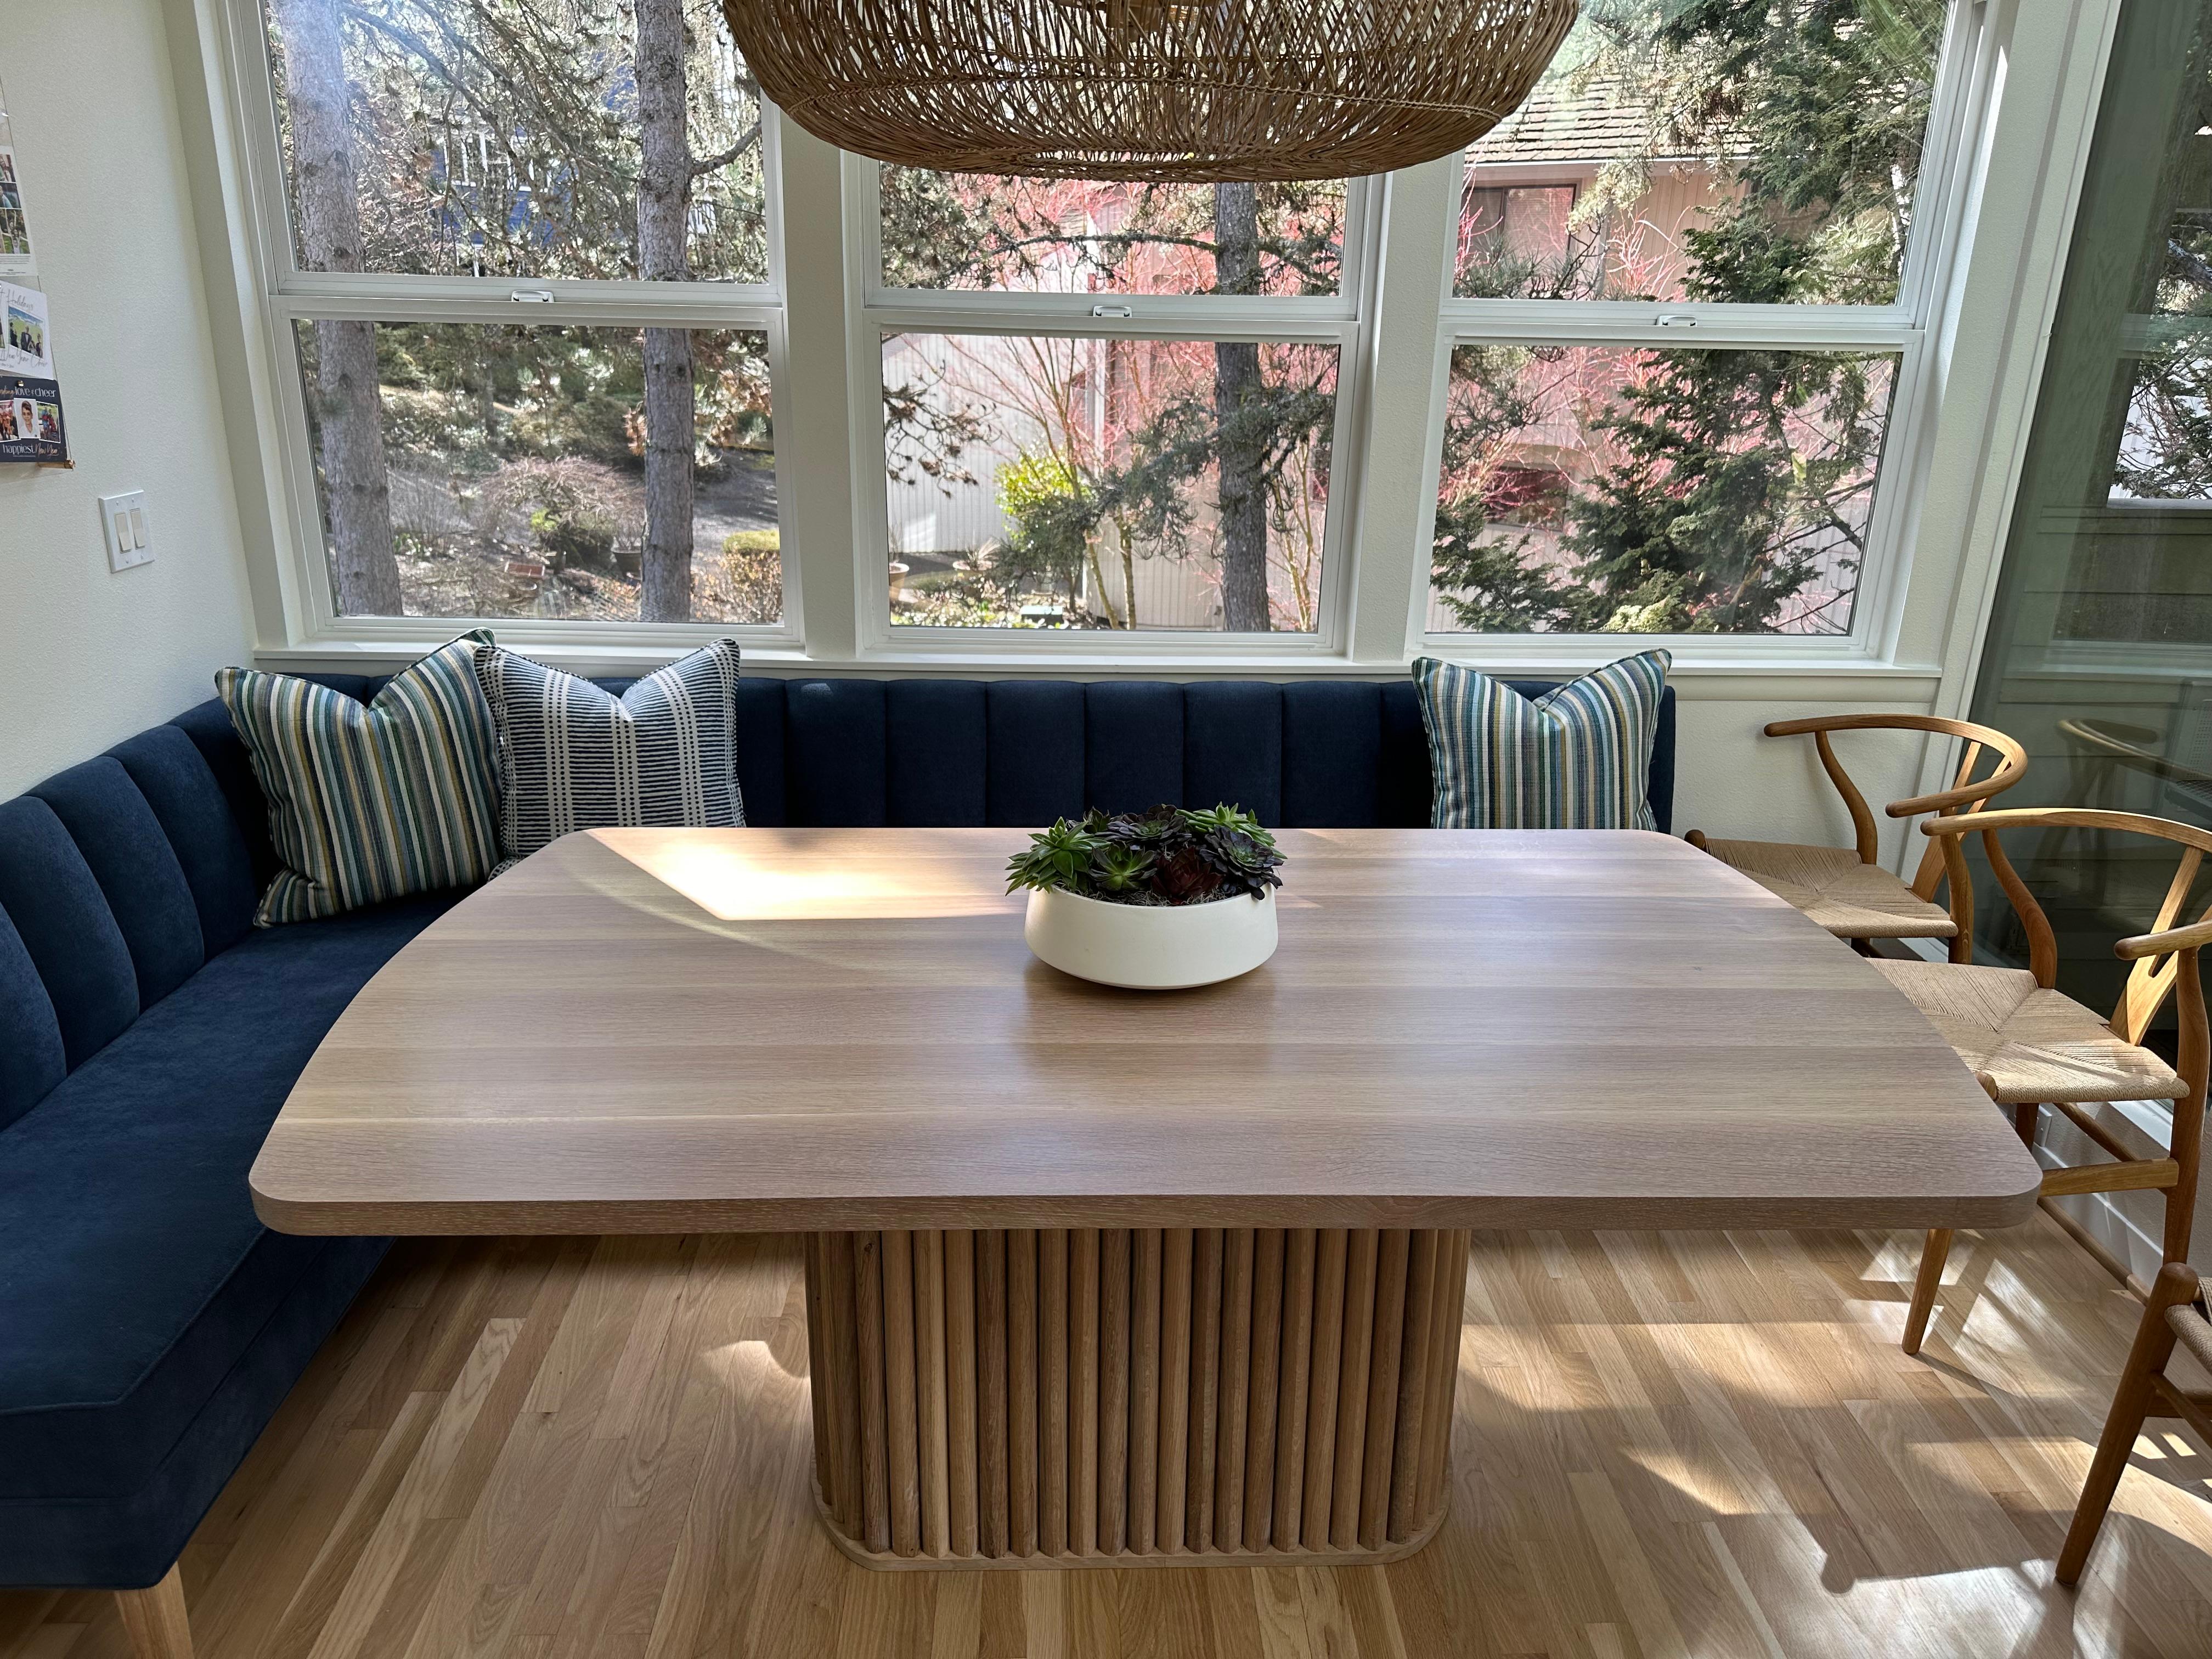 This beautiful dining table is made from solid Oregon white oak harvested from the Willamette Valley. The top is rift sawn white oak which offers a beautifully consistent and elegant grain pattern. It is 1.75